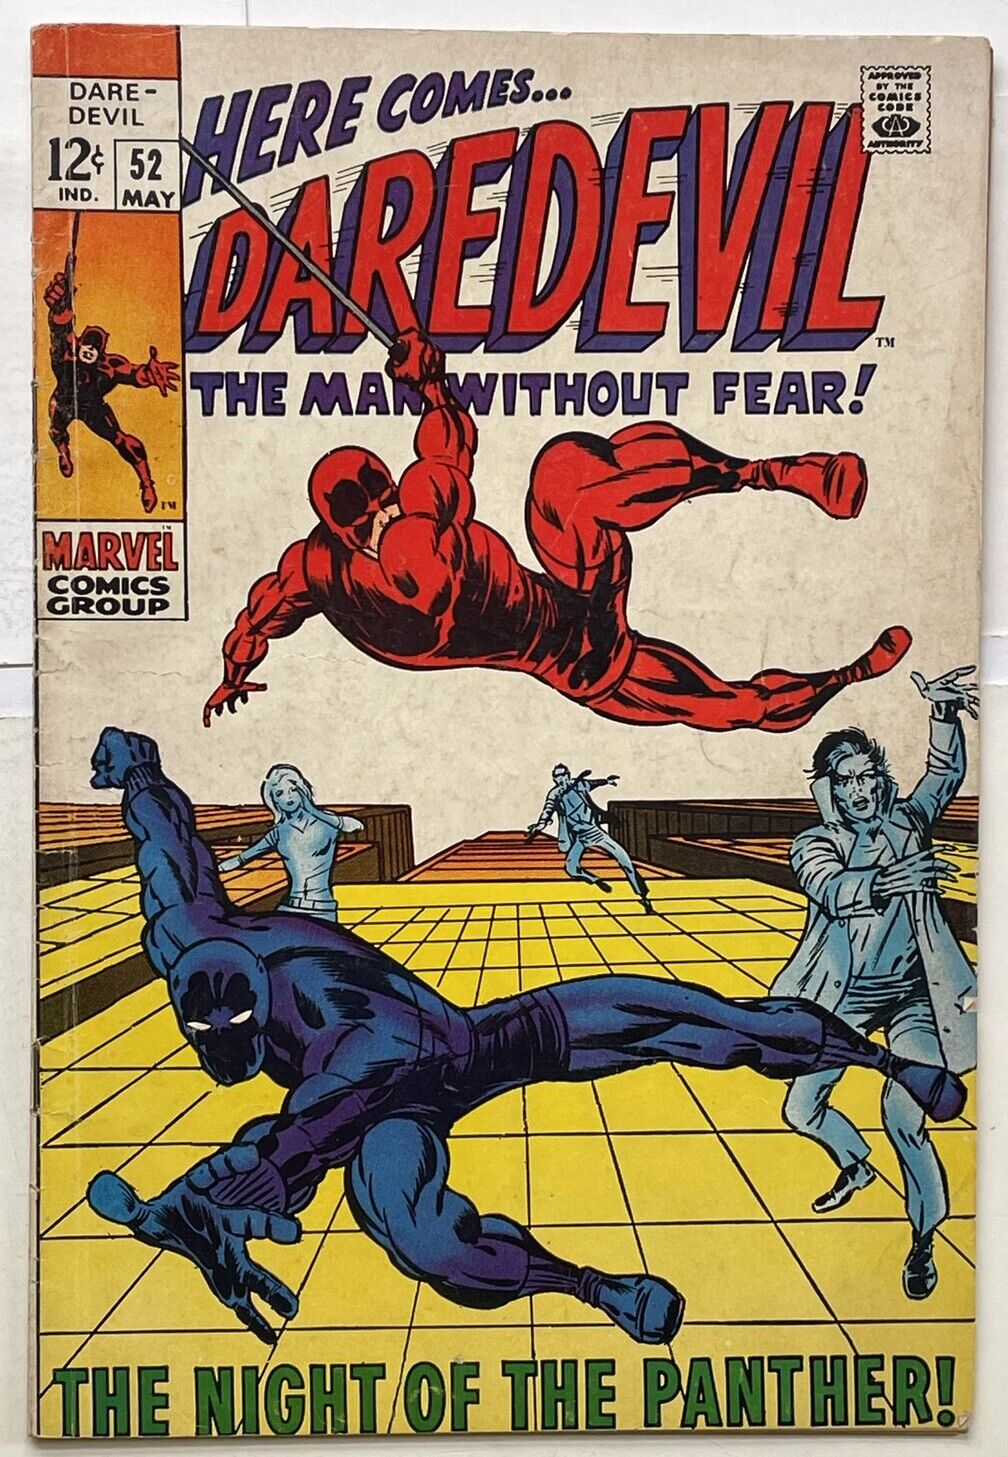 DAREDEVIL #52 1969 BLACK PANTHER appears, Barry Windsor Smith